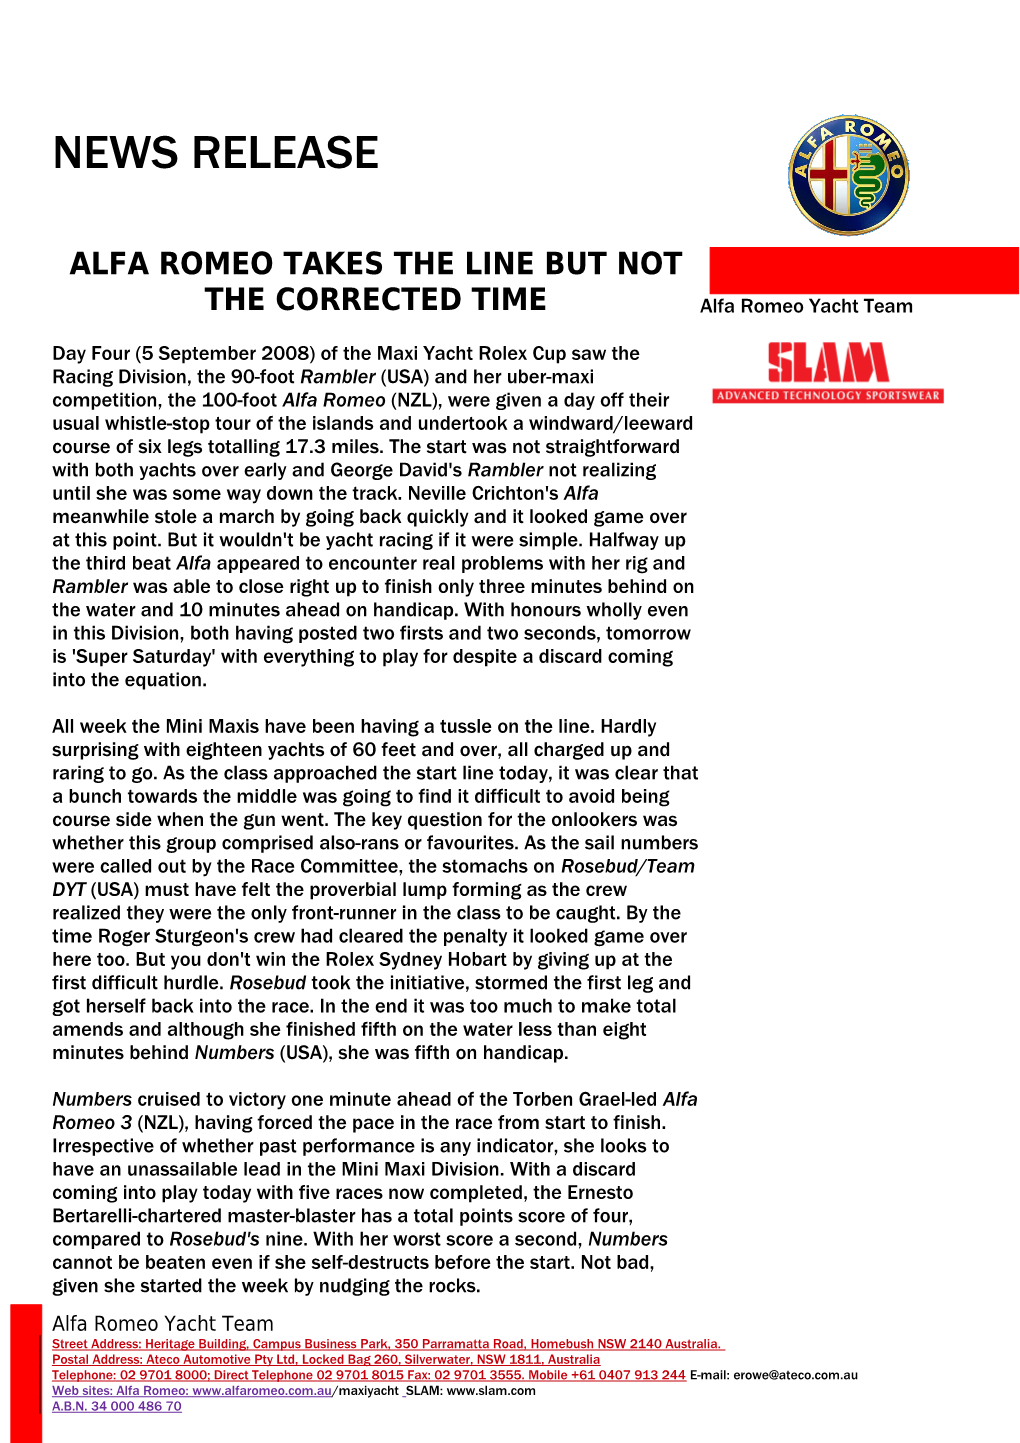 Alfa Romeo Takes the Line but Not the Corrected Time